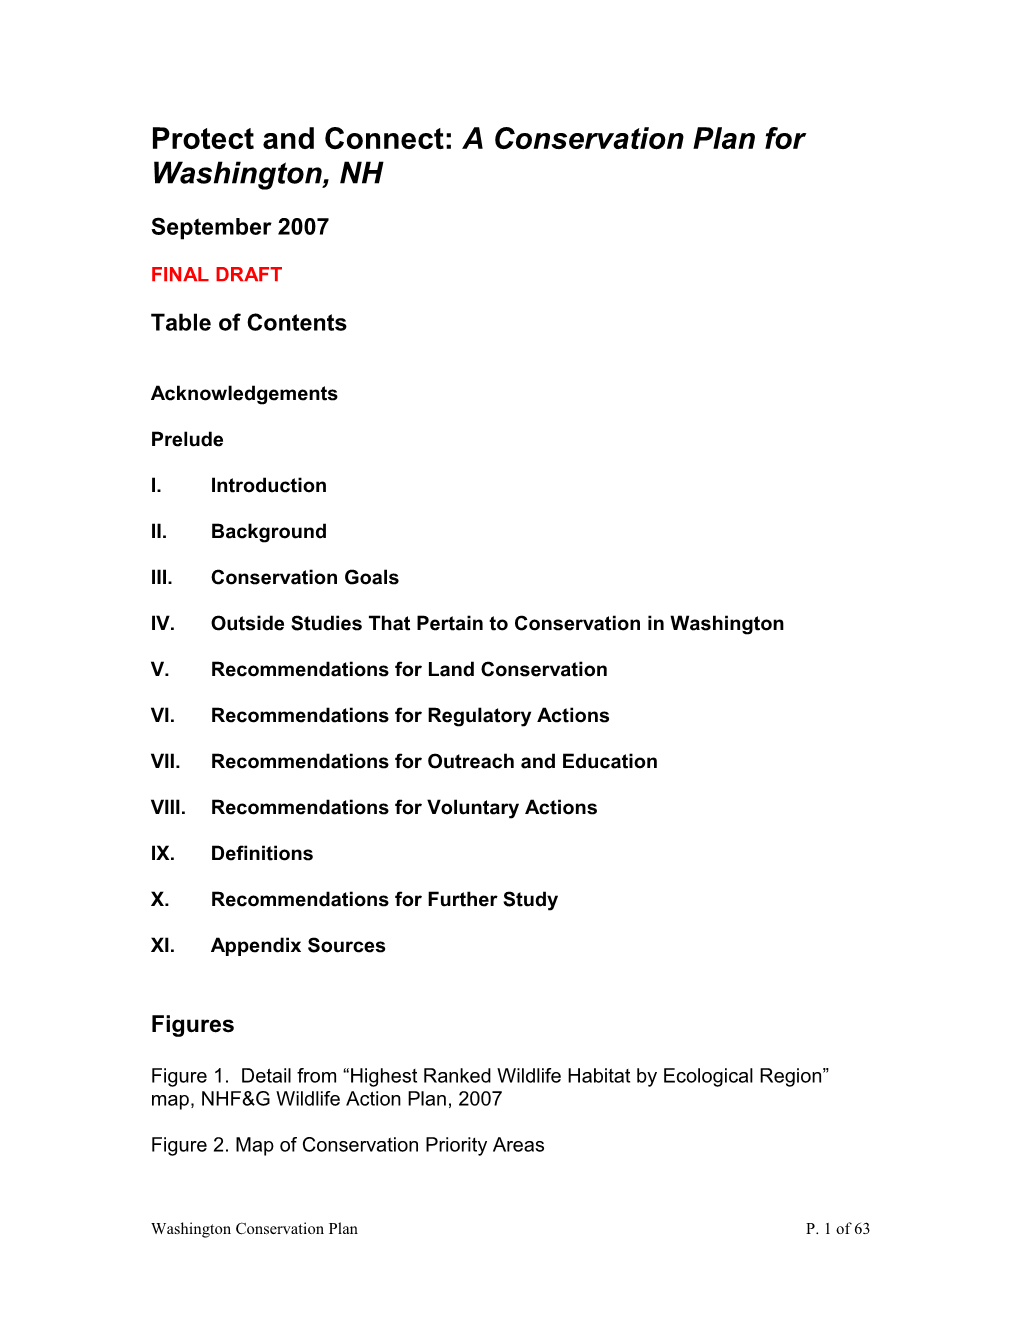 Protect and Connect: a Conservation Plan for Washington, NH